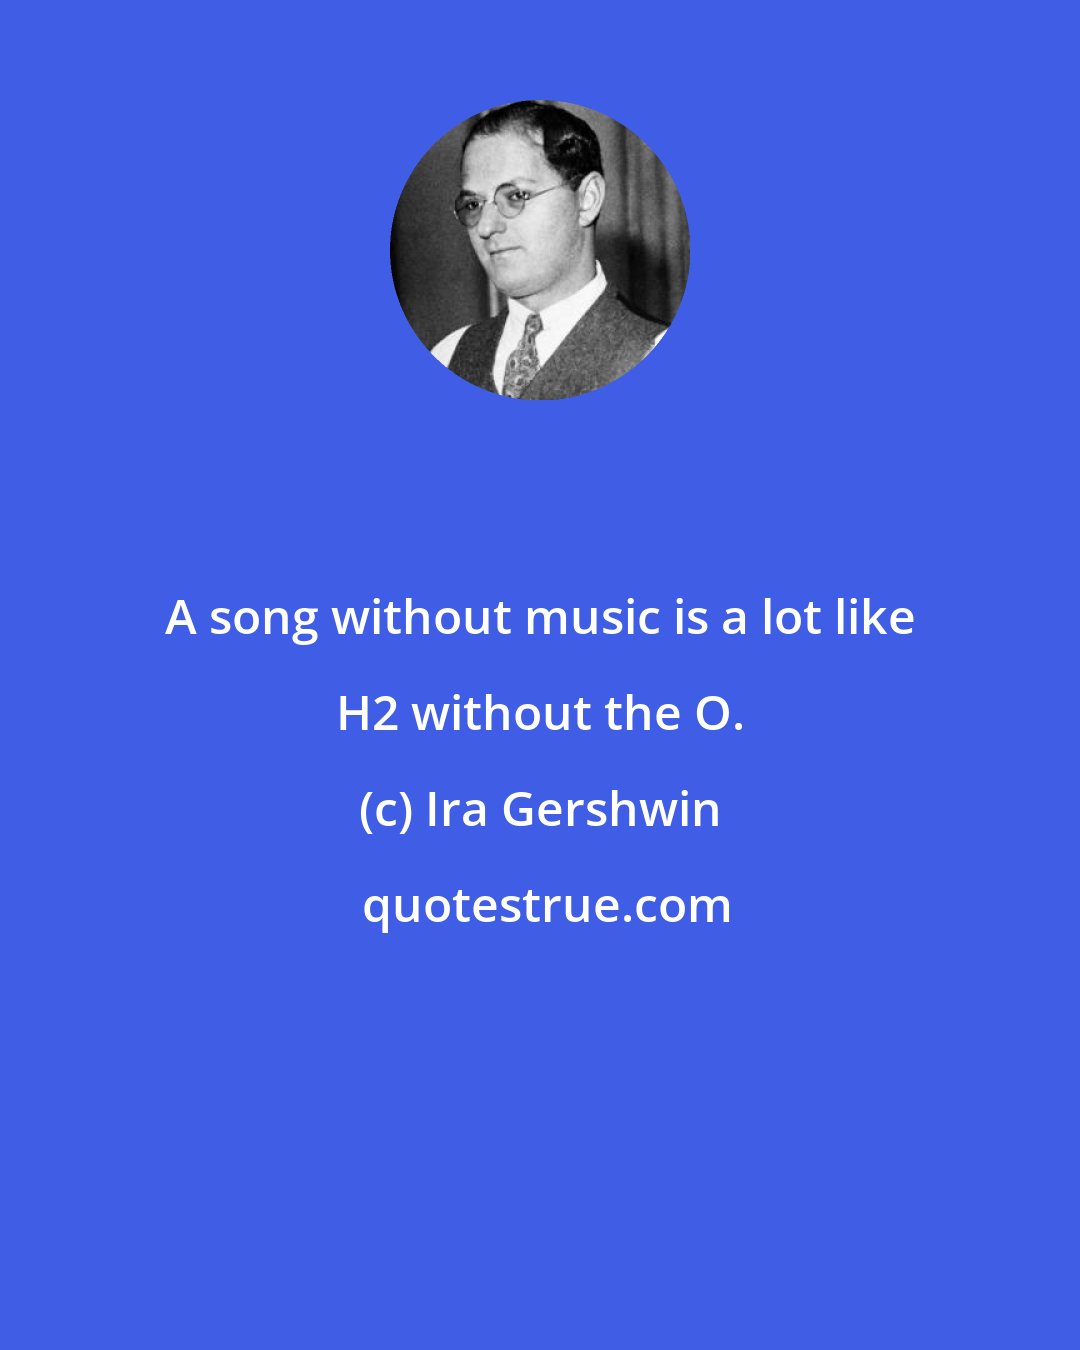 Ira Gershwin: A song without music is a lot like H2 without the O.